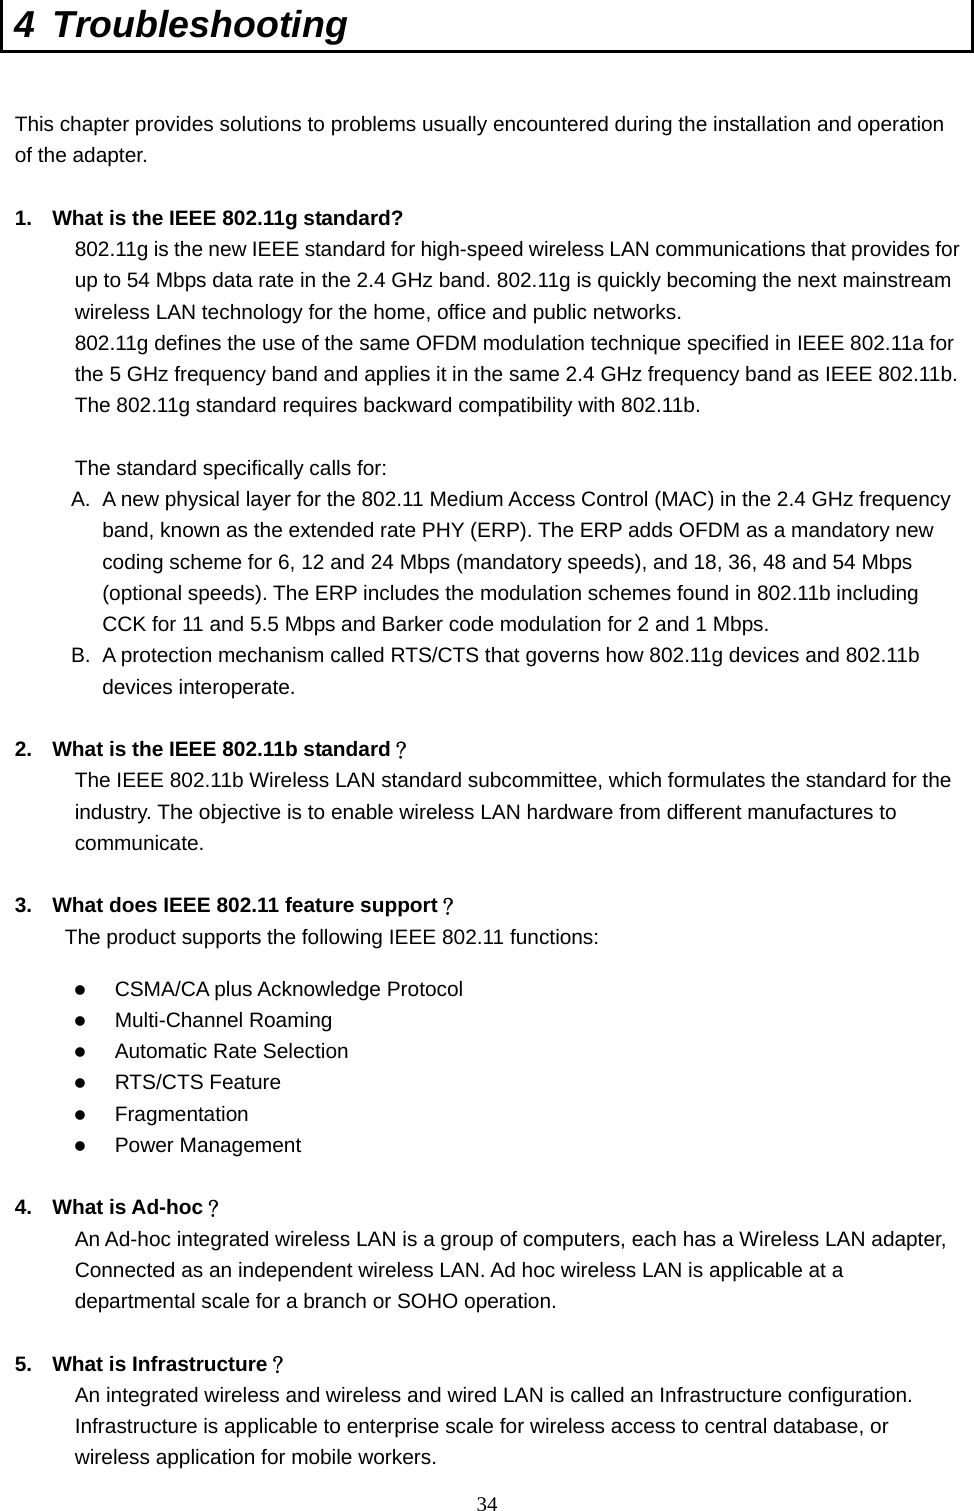  34 4 Troubleshooting  This chapter provides solutions to problems usually encountered during the installation and operation of the adapter.    1.  What is the IEEE 802.11g standard? 802.11g is the new IEEE standard for high-speed wireless LAN communications that provides for up to 54 Mbps data rate in the 2.4 GHz band. 802.11g is quickly becoming the next mainstream wireless LAN technology for the home, office and public networks.   802.11g defines the use of the same OFDM modulation technique specified in IEEE 802.11a for the 5 GHz frequency band and applies it in the same 2.4 GHz frequency band as IEEE 802.11b. The 802.11g standard requires backward compatibility with 802.11b.  The standard specifically calls for:   A.  A new physical layer for the 802.11 Medium Access Control (MAC) in the 2.4 GHz frequency band, known as the extended rate PHY (ERP). The ERP adds OFDM as a mandatory new coding scheme for 6, 12 and 24 Mbps (mandatory speeds), and 18, 36, 48 and 54 Mbps (optional speeds). The ERP includes the modulation schemes found in 802.11b including CCK for 11 and 5.5 Mbps and Barker code modulation for 2 and 1 Mbps. B.  A protection mechanism called RTS/CTS that governs how 802.11g devices and 802.11b devices interoperate.  2.  What is the IEEE 802.11b standard？ The IEEE 802.11b Wireless LAN standard subcommittee, which formulates the standard for the industry. The objective is to enable wireless LAN hardware from different manufactures to communicate.  3.  What does IEEE 802.11 feature support？ The product supports the following IEEE 802.11 functions: z CSMA/CA plus Acknowledge Protocol z Multi-Channel Roaming z Automatic Rate Selection z RTS/CTS Feature z Fragmentation z Power Management  4. What is Ad-hoc？ An Ad-hoc integrated wireless LAN is a group of computers, each has a Wireless LAN adapter, Connected as an independent wireless LAN. Ad hoc wireless LAN is applicable at a departmental scale for a branch or SOHO operation.  5.  What is Infrastructure？ An integrated wireless and wireless and wired LAN is called an Infrastructure configuration. Infrastructure is applicable to enterprise scale for wireless access to central database, or wireless application for mobile workers. 